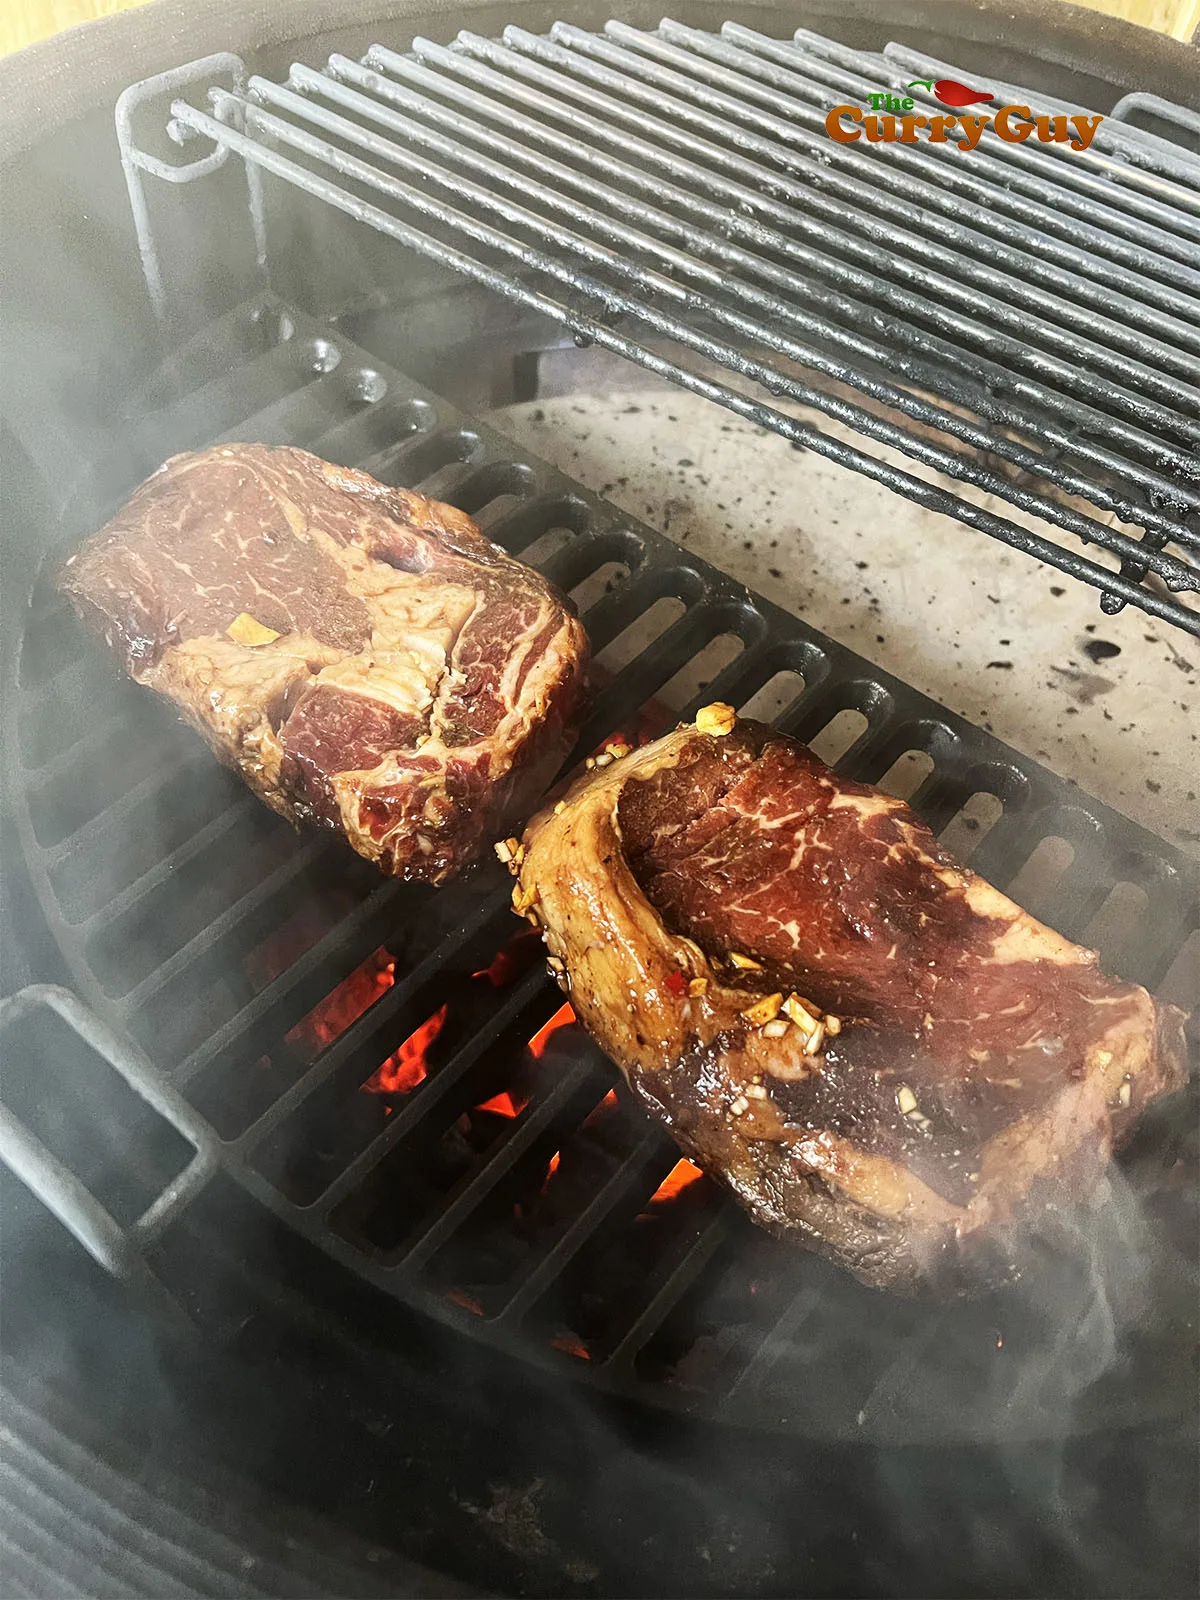 Grilling the steaks